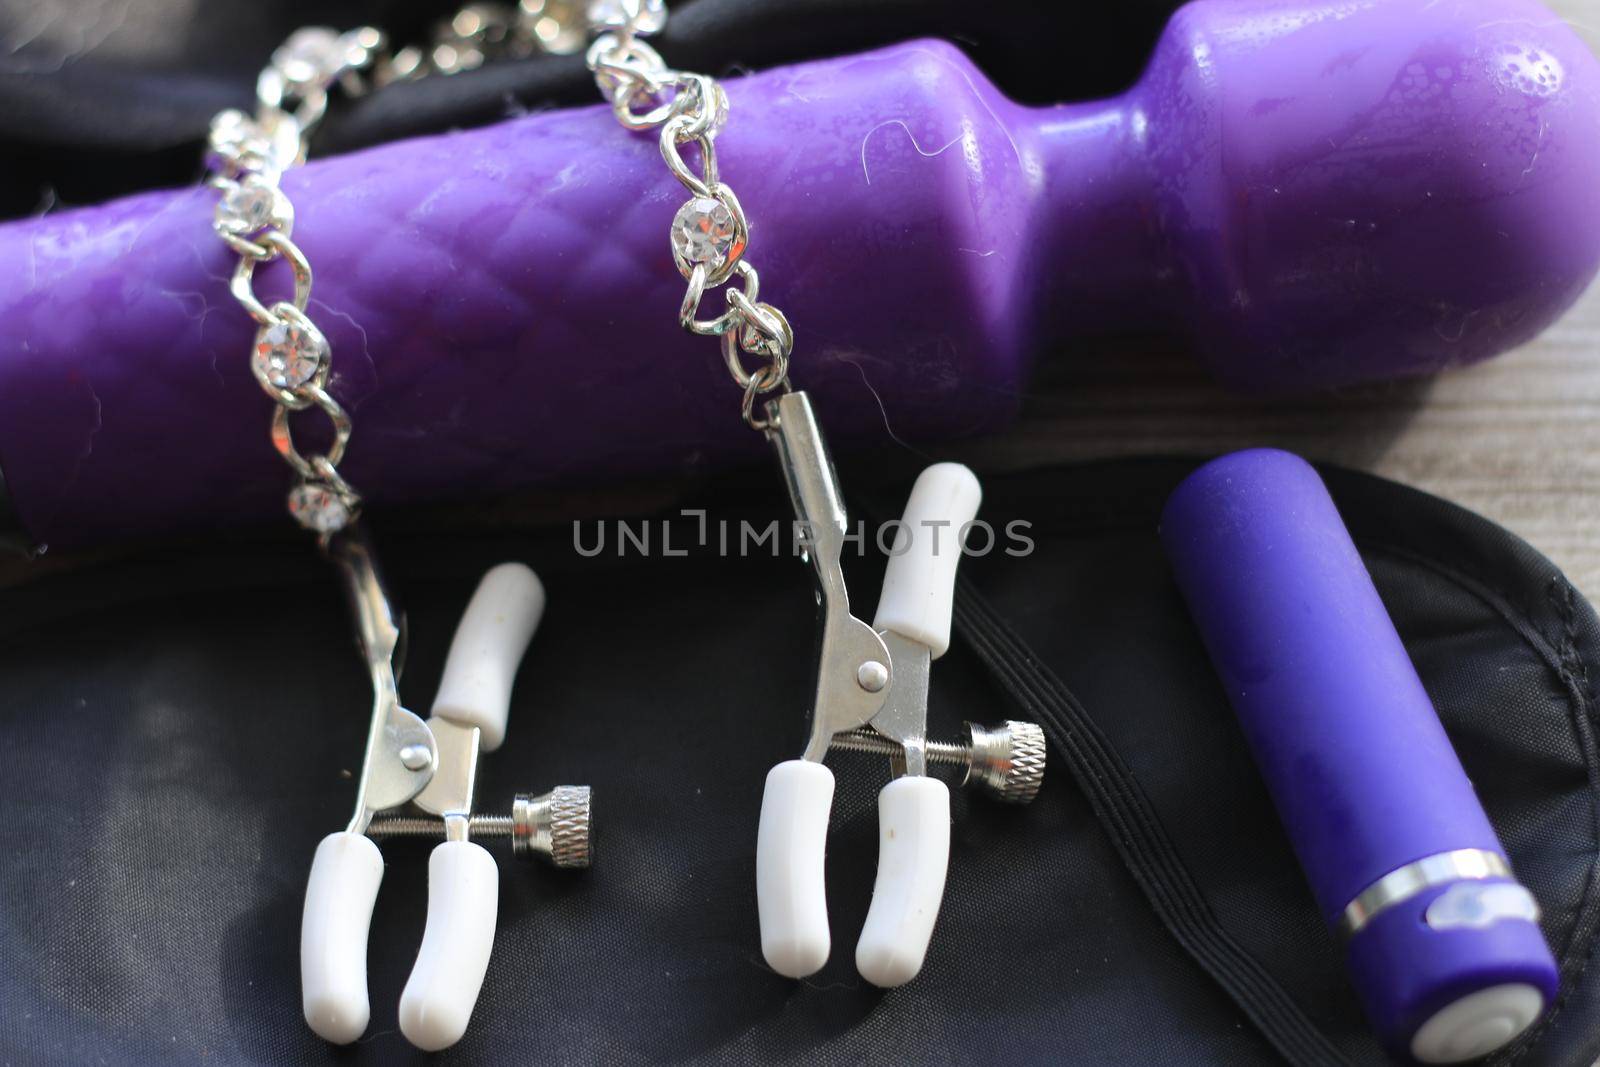 BDSM themed images showing a large dildo, nipple clamps, restraints, eye covers, and a condom by mynewturtle1